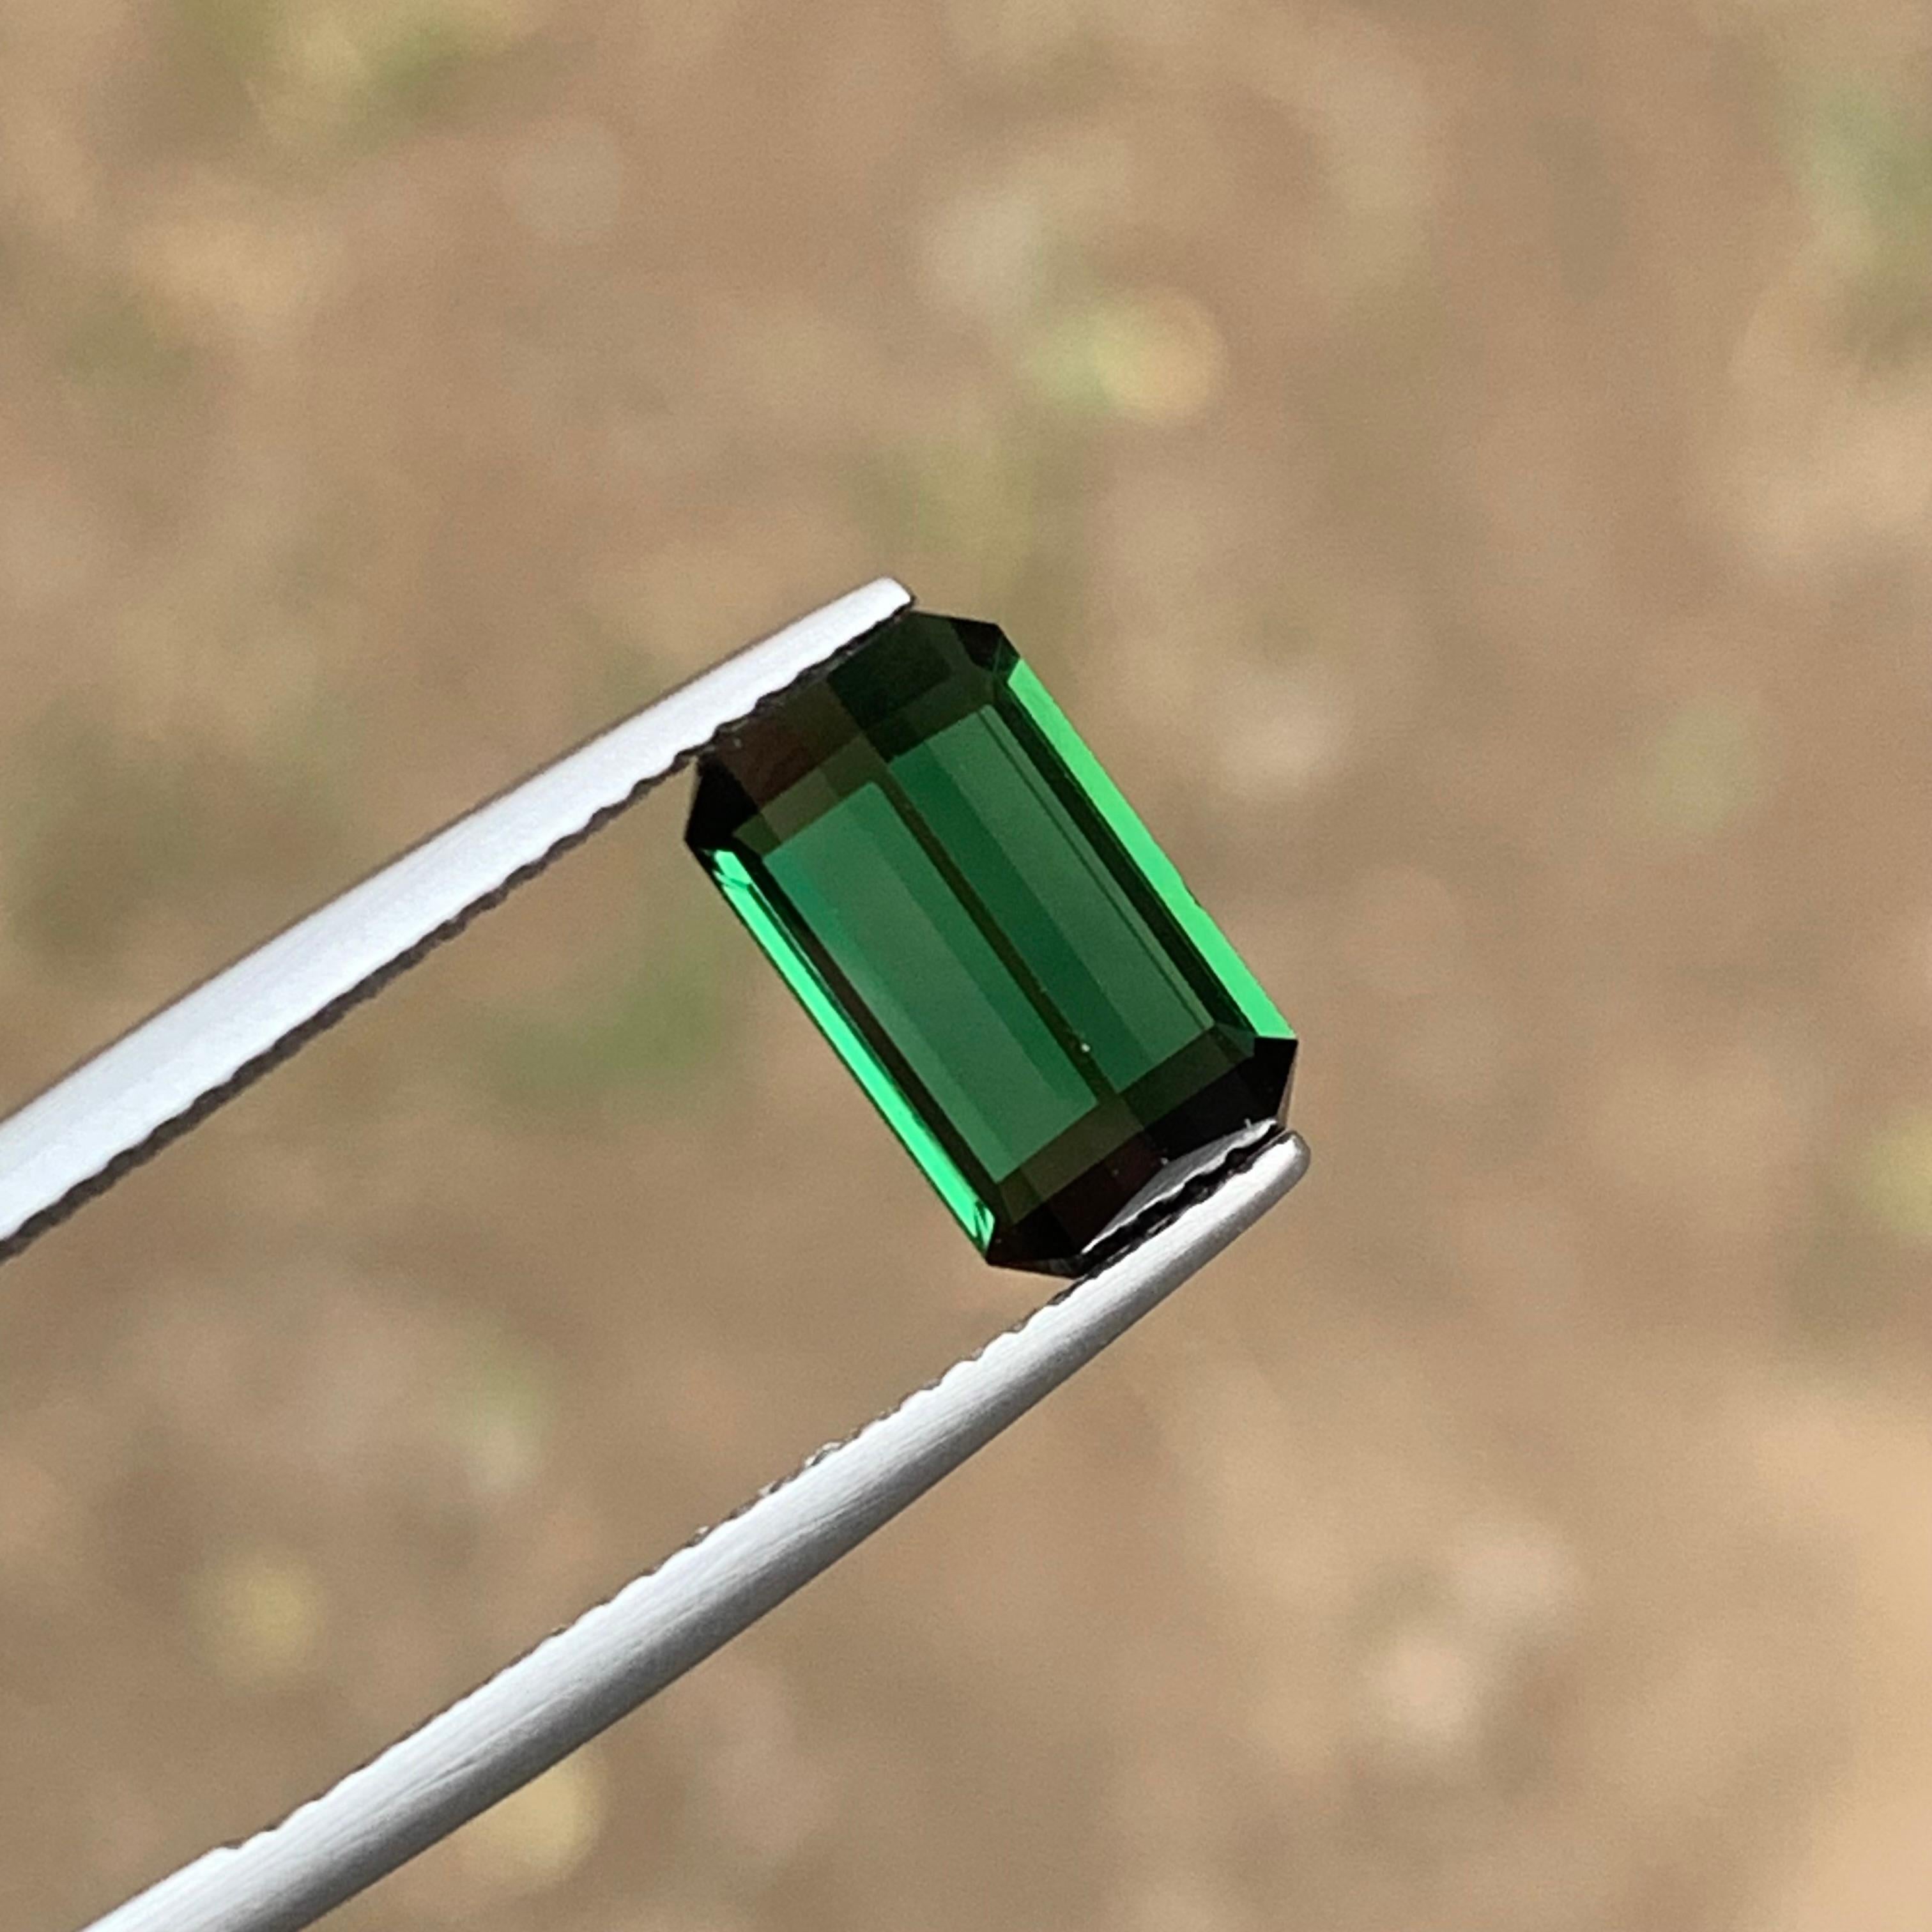 Rare Deep Green Natural Tourmaline Gemstone 2.95 Ct Emerald Cut for Ring/Pendant For Sale 3